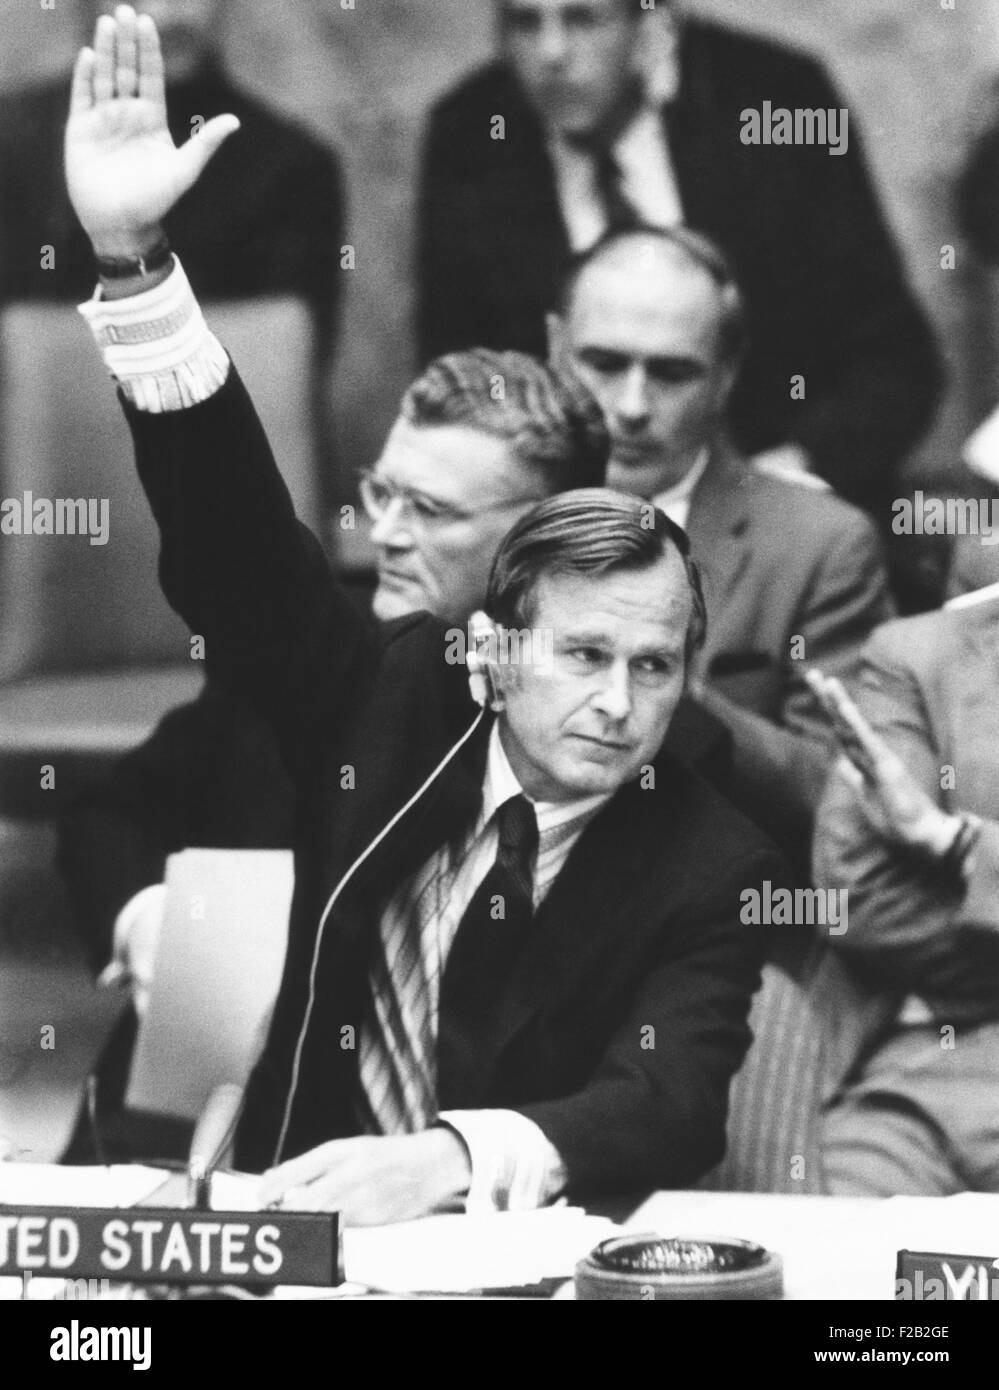 Ambassador George Bush casts the 2nd U.S. veto in the United Nations history. It was to block an African measure calling for a simple sensation of military operations in the Middle East without reference to the Munich massacre of Israeli Olympic athletes. Sept. 10, 1972. (CSU 2015 7 347) Stock Photo